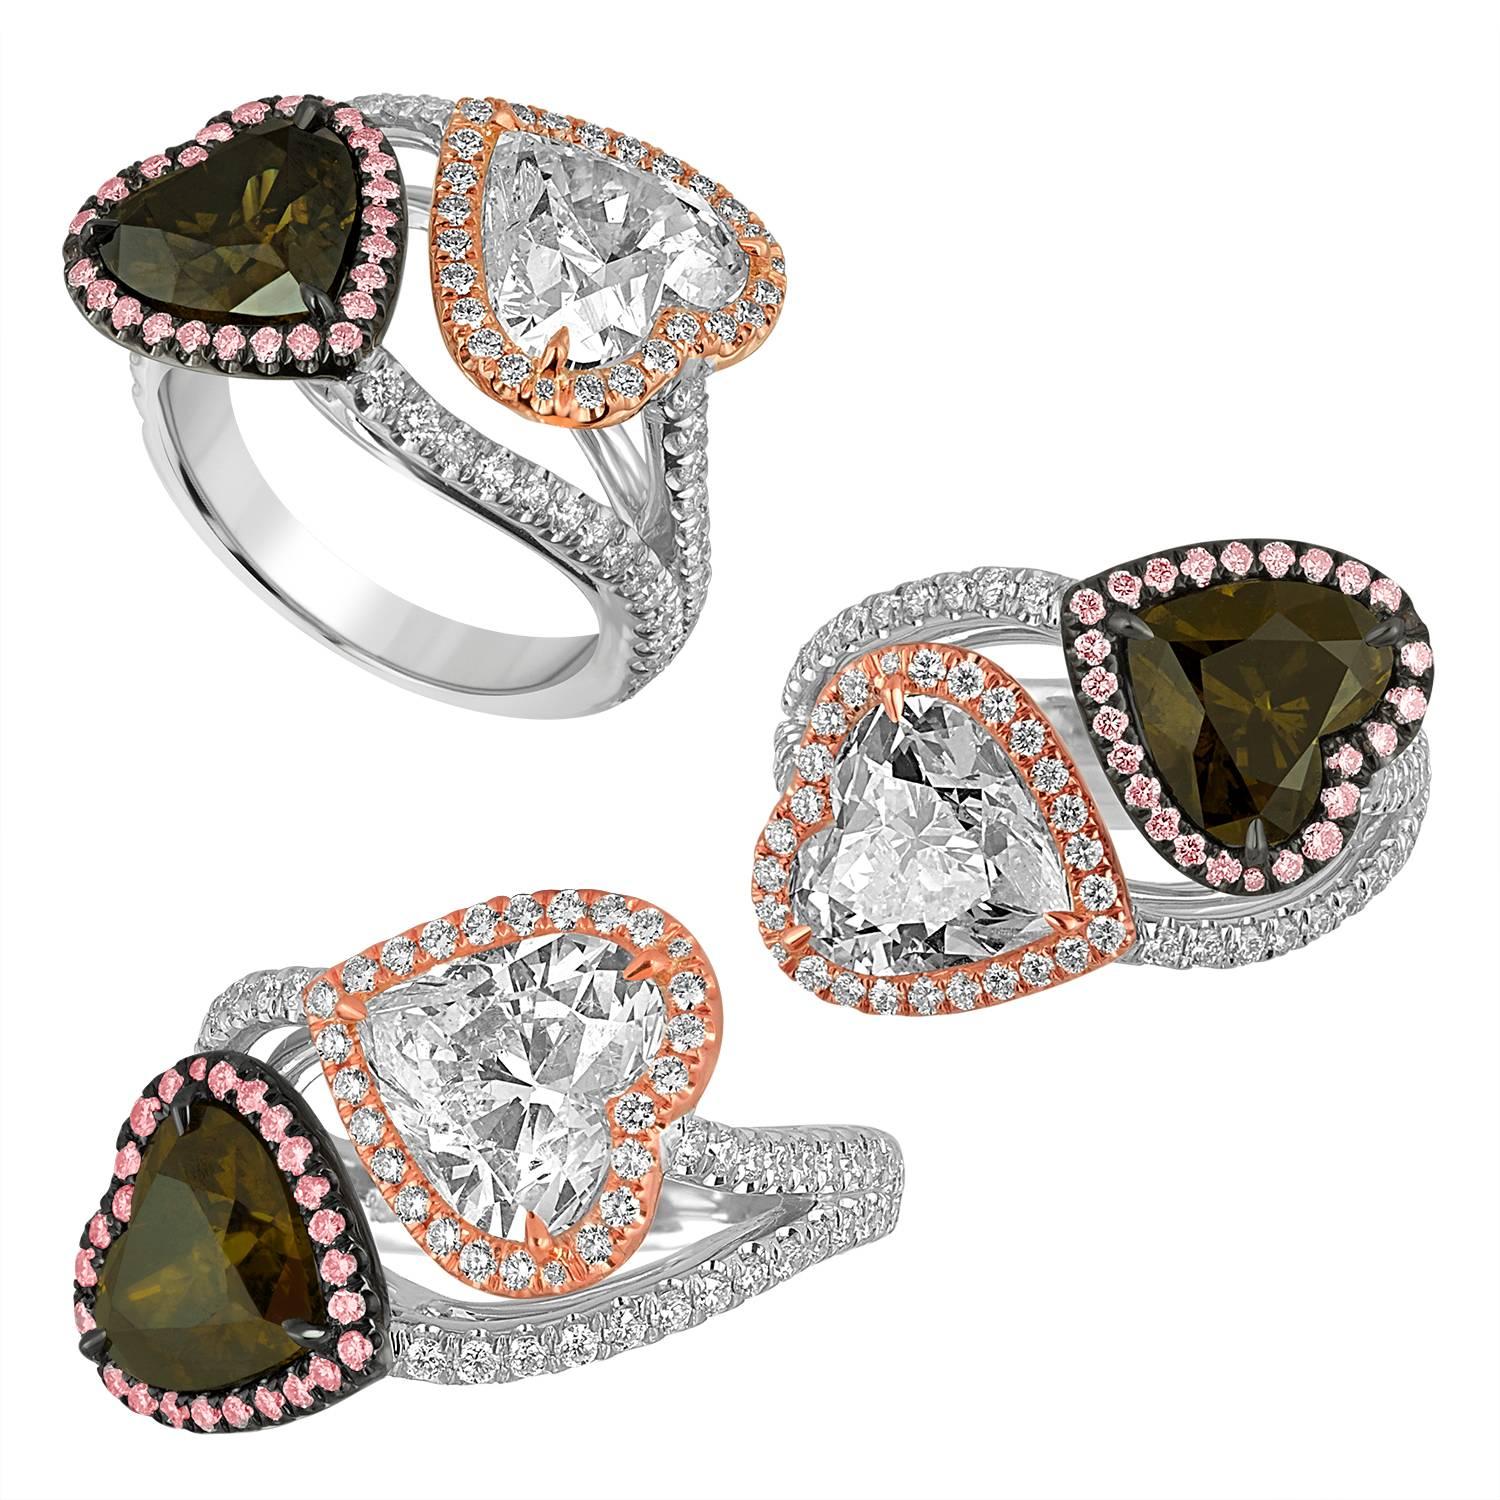 Contemporary White and Brown Heart Shaped Diamonds in Two-Color Gold Ring